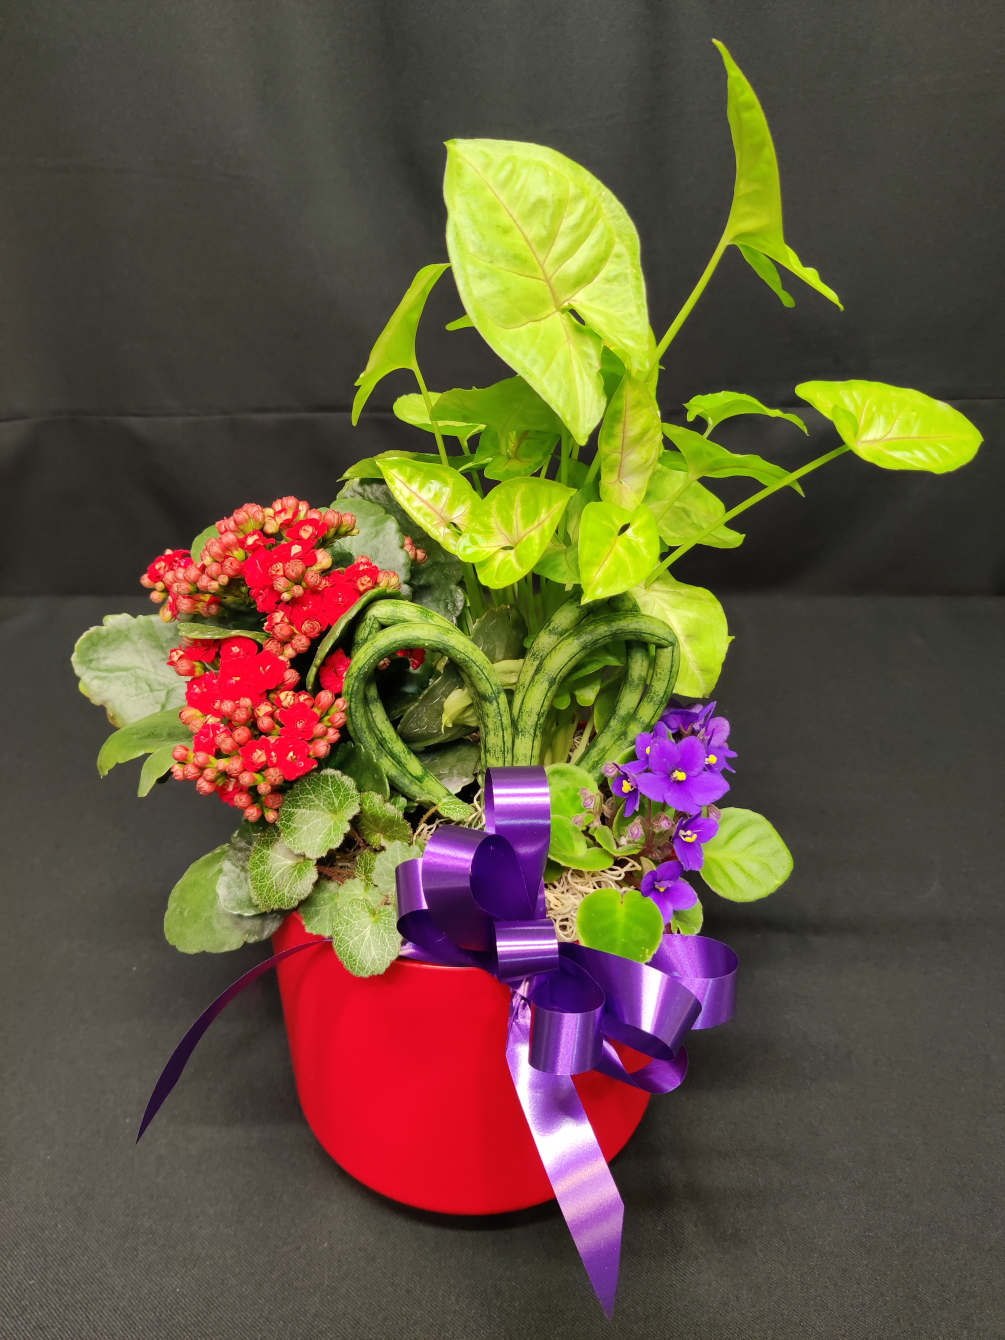 Gorgeous bright red pot Fun assortment of living plants including a heart